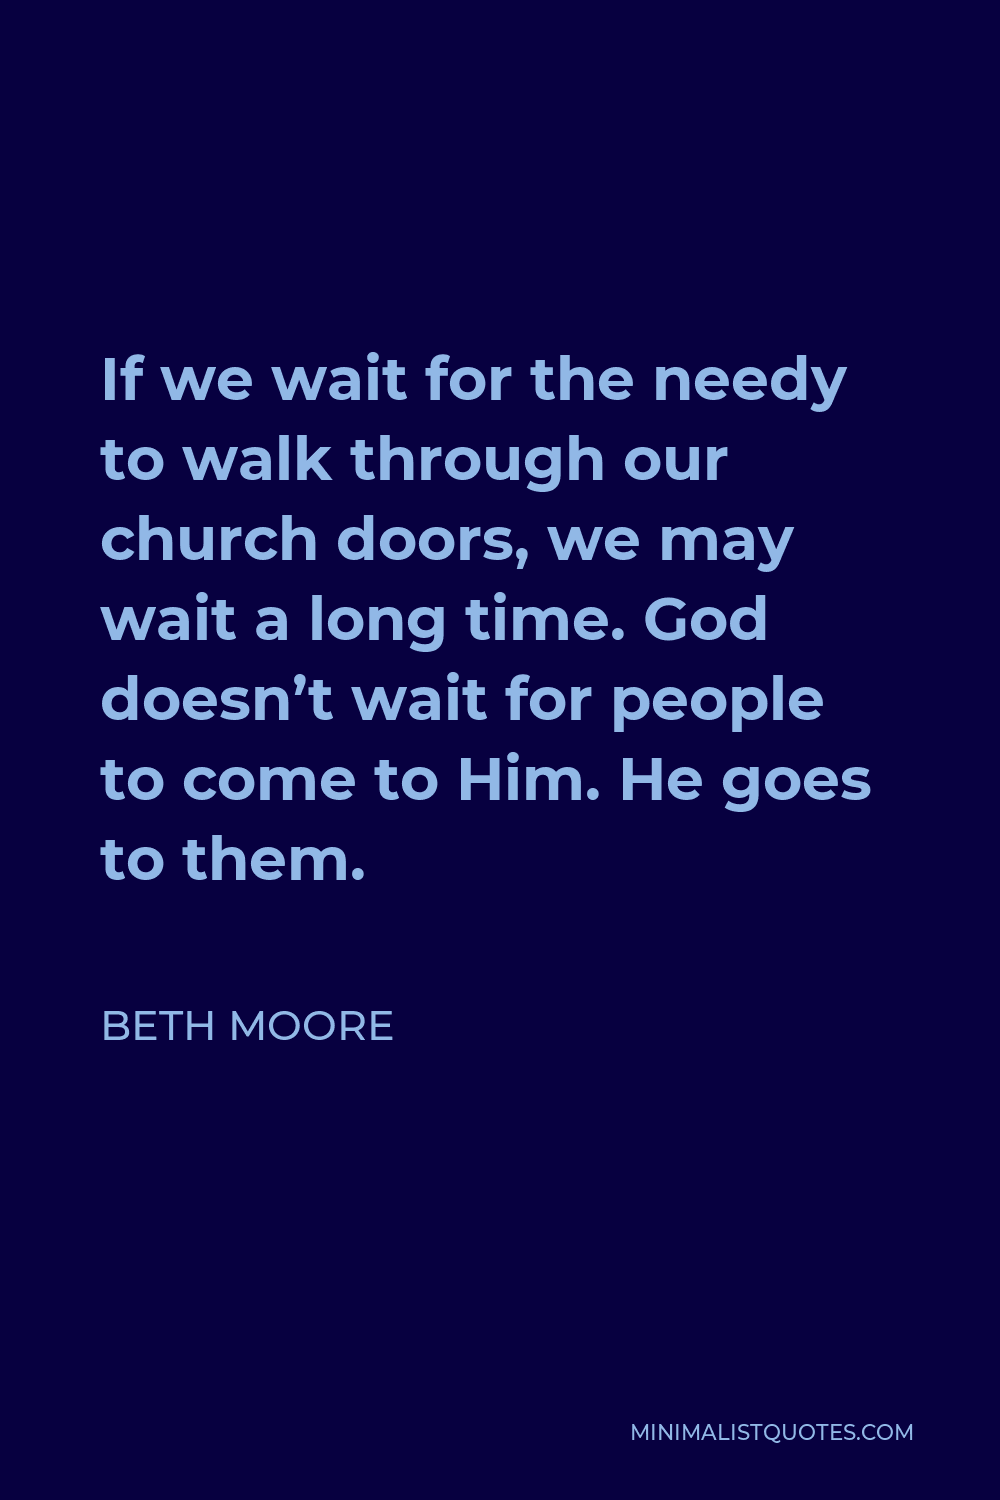 Beth Moore Quote - If we wait for the needy to walk through our church doors, we may wait a long time. God doesn’t wait for people to come to Him. He goes to them.